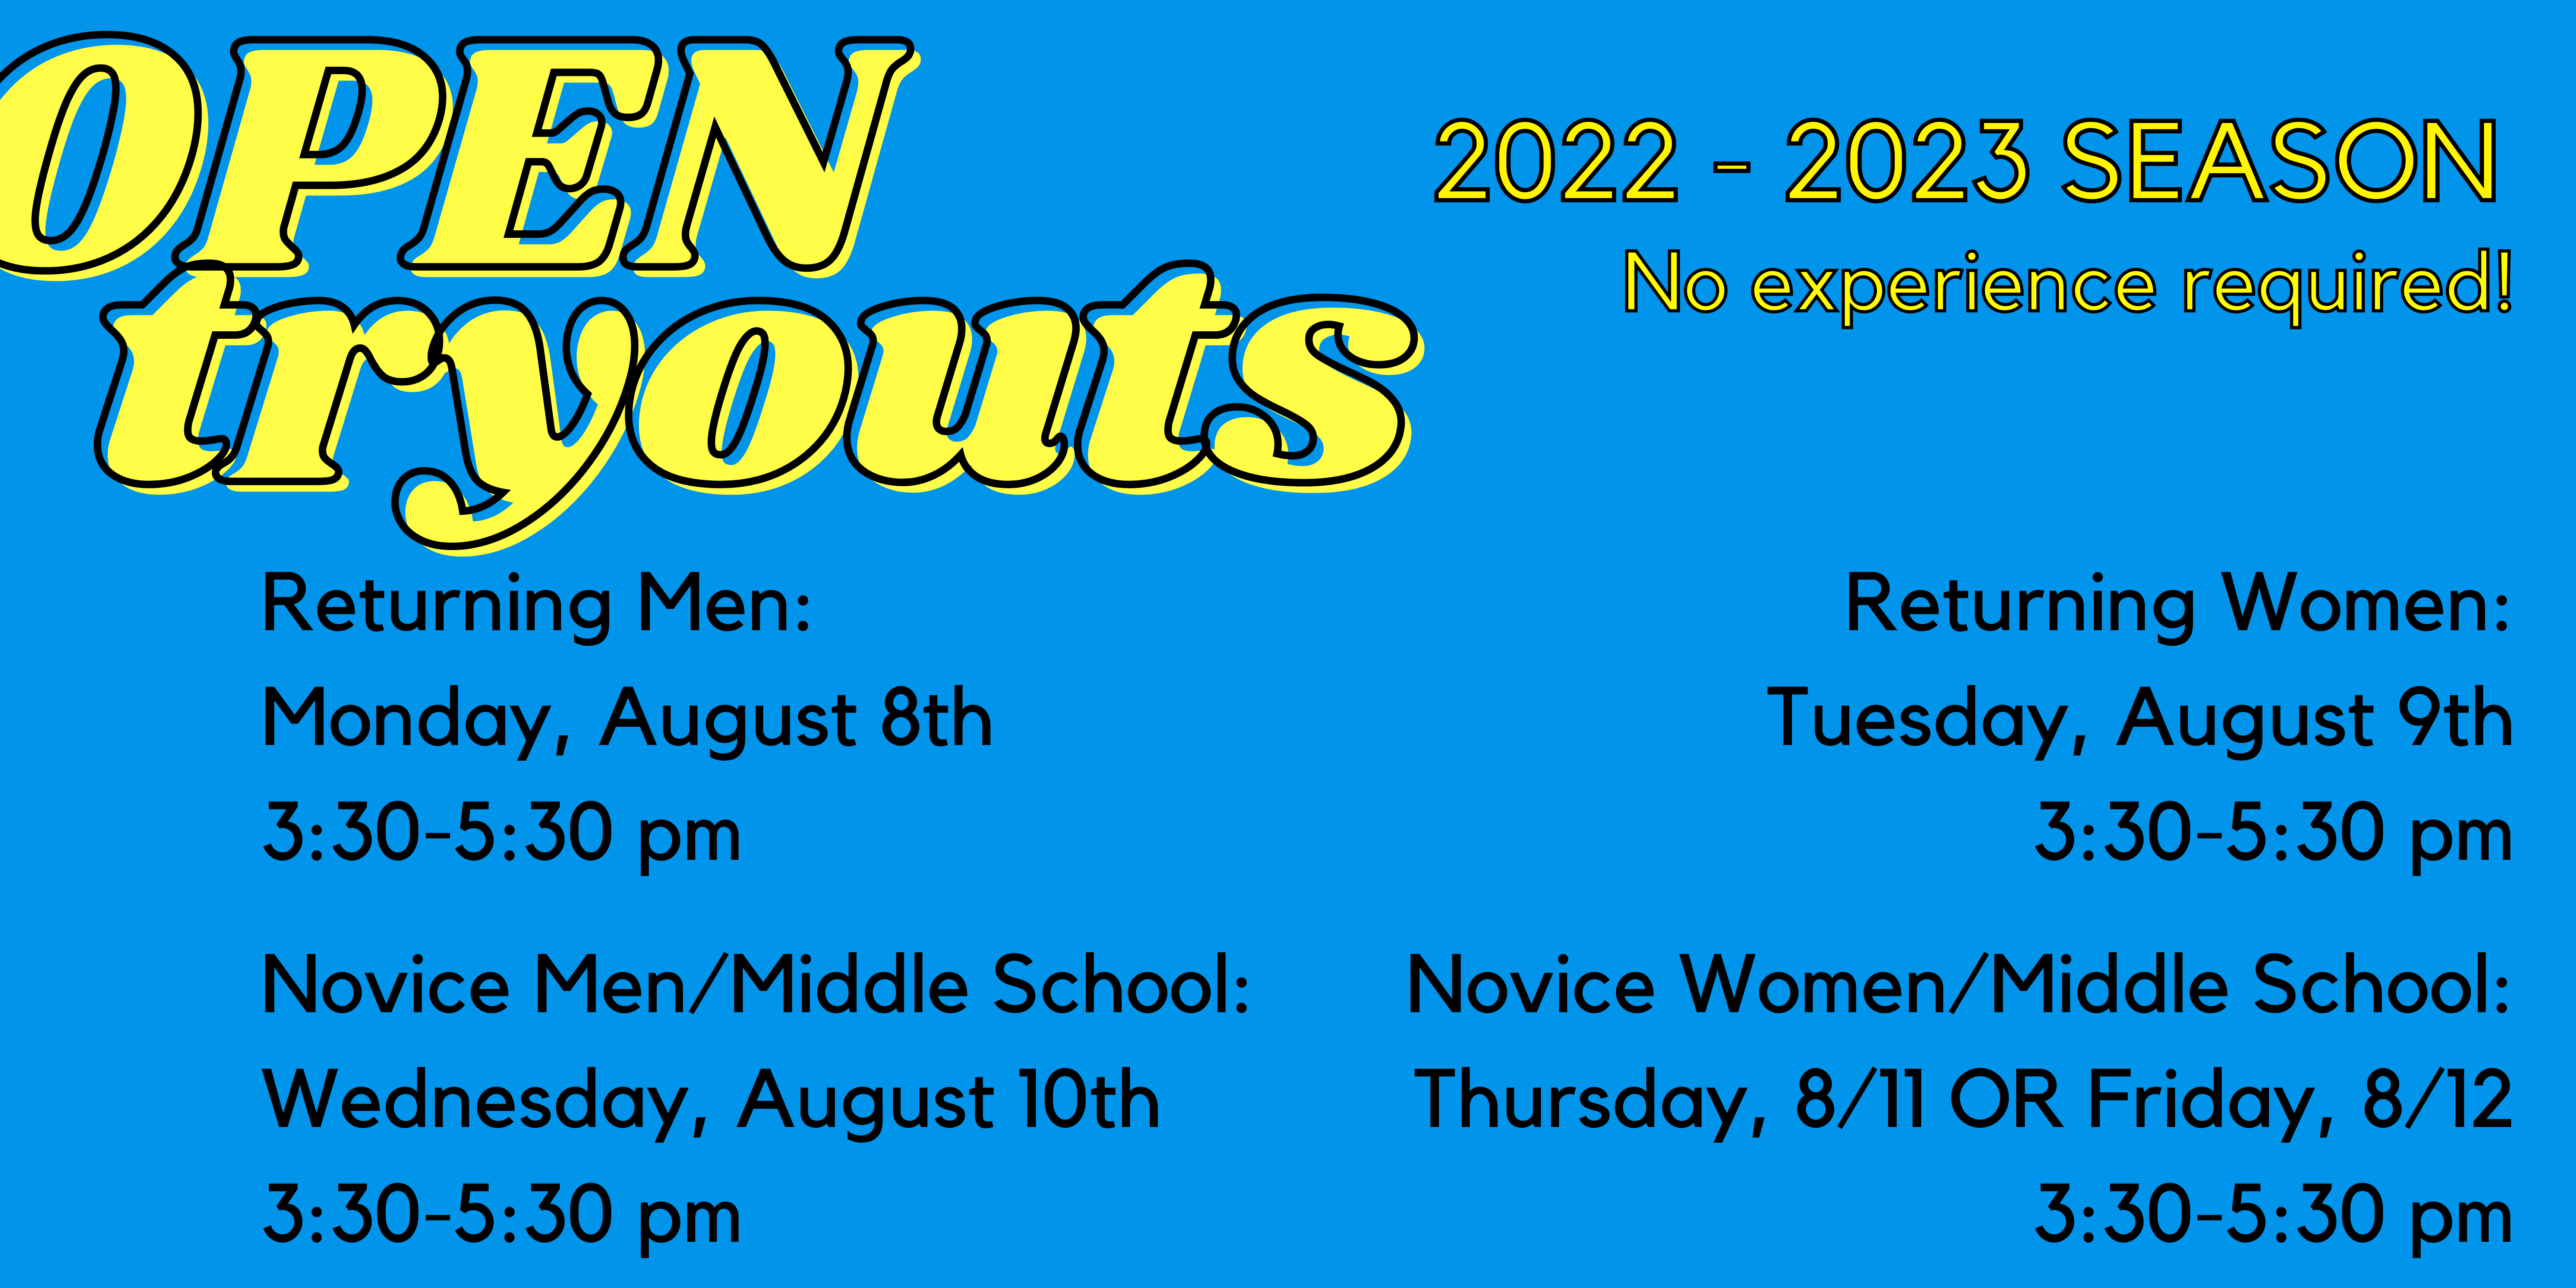 Open Tryouts Newport Aquatic Center Junior Youth Rowing 2022